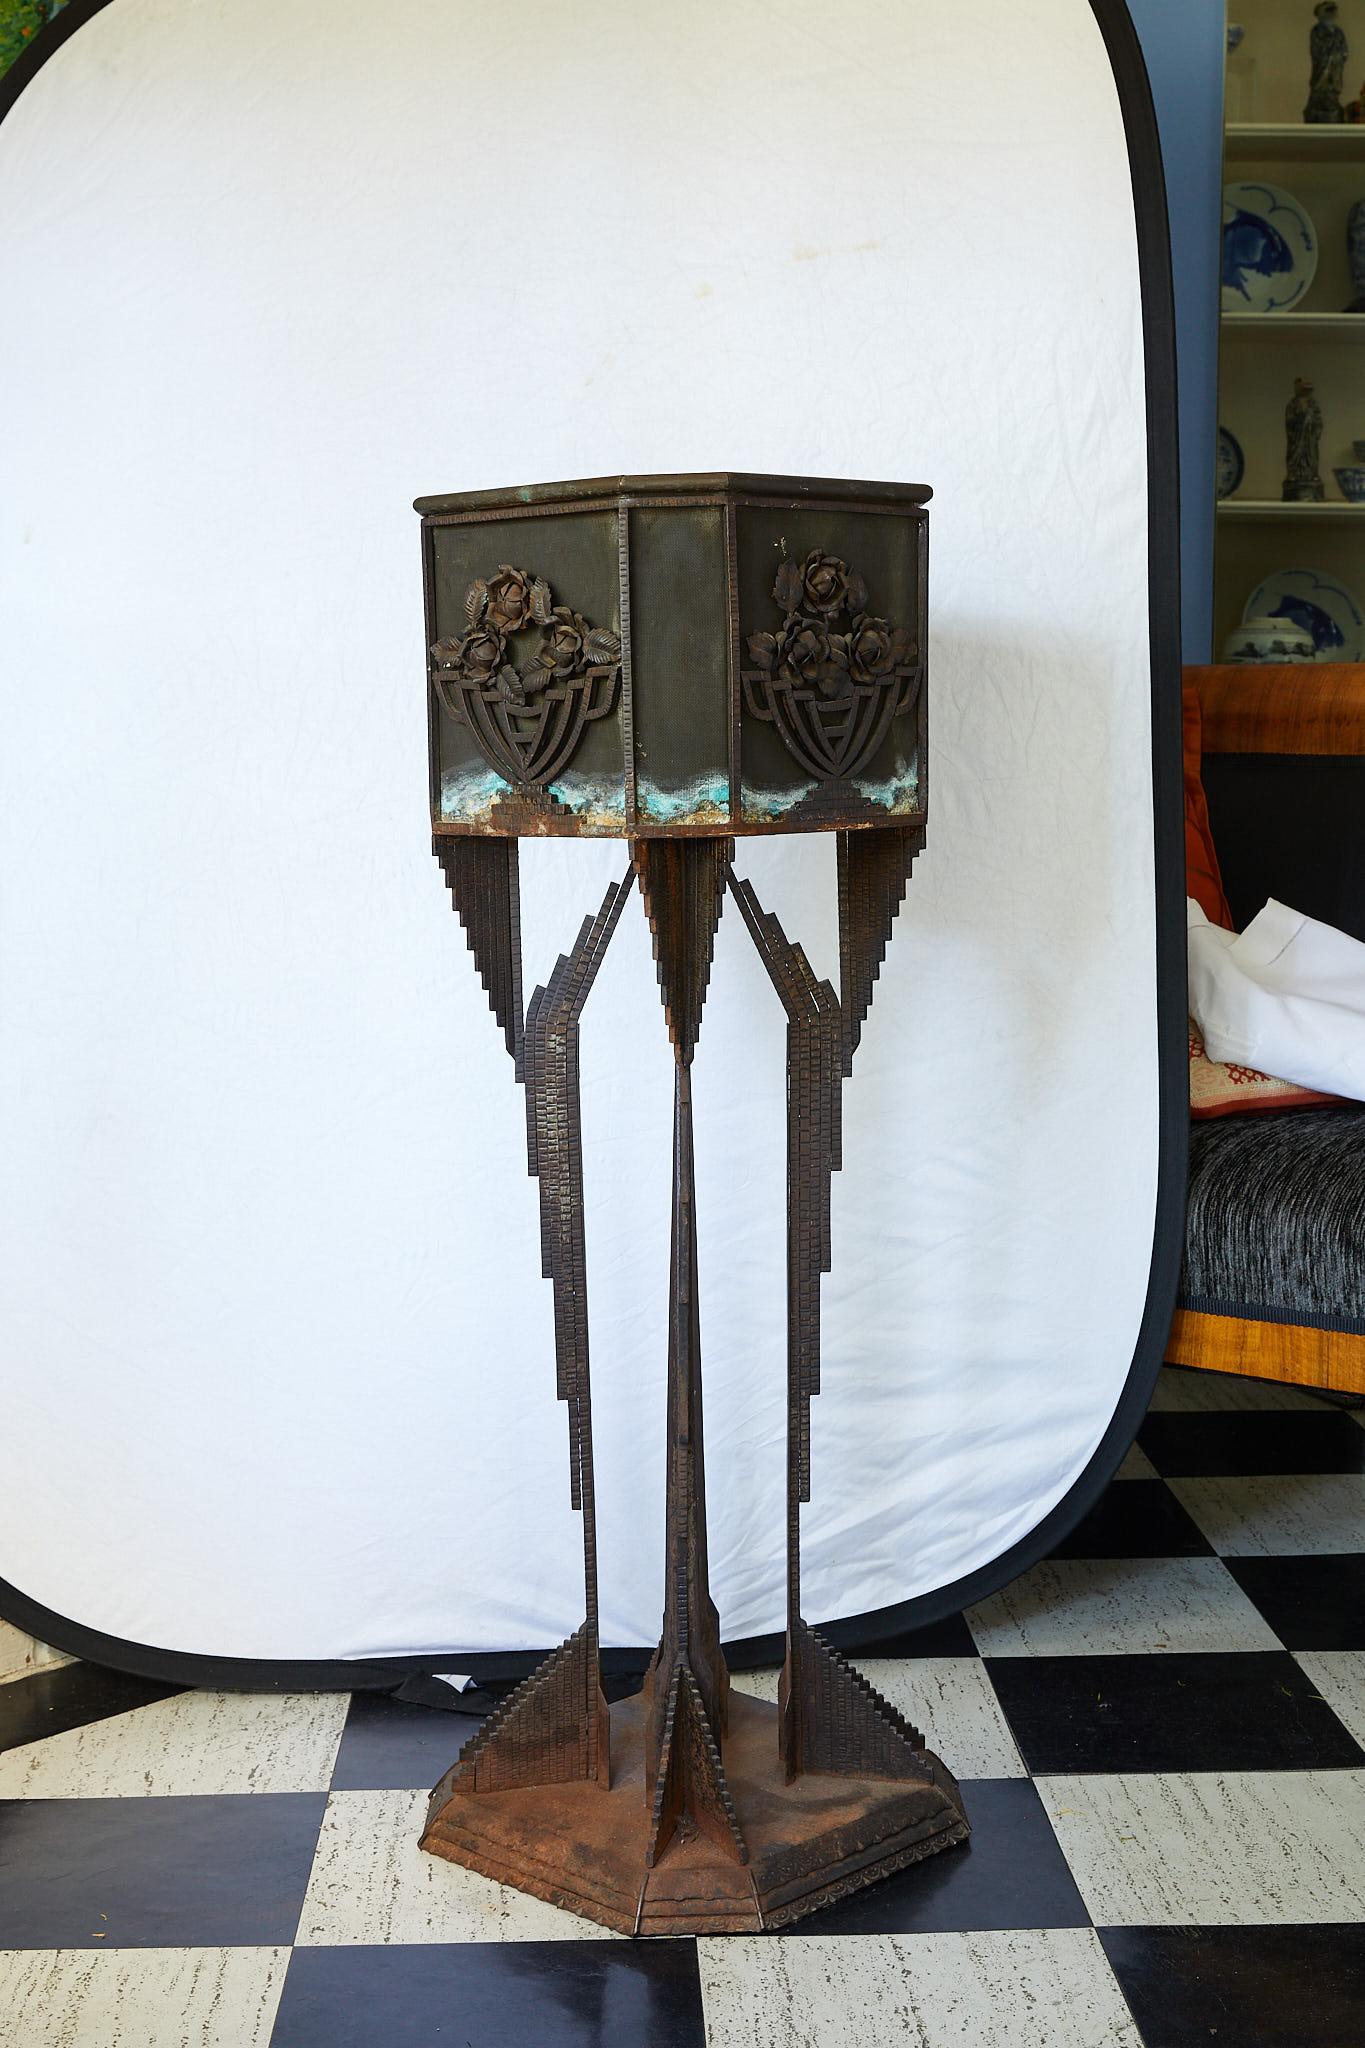 Art Deco sculptural iron pedestal supporting a square wire mesh planter with decorative appliqués of metal flowers in iron bowls. The planter holds a metal liner on its interior. The pedestal is made of four cast iron winged legs on a tiered